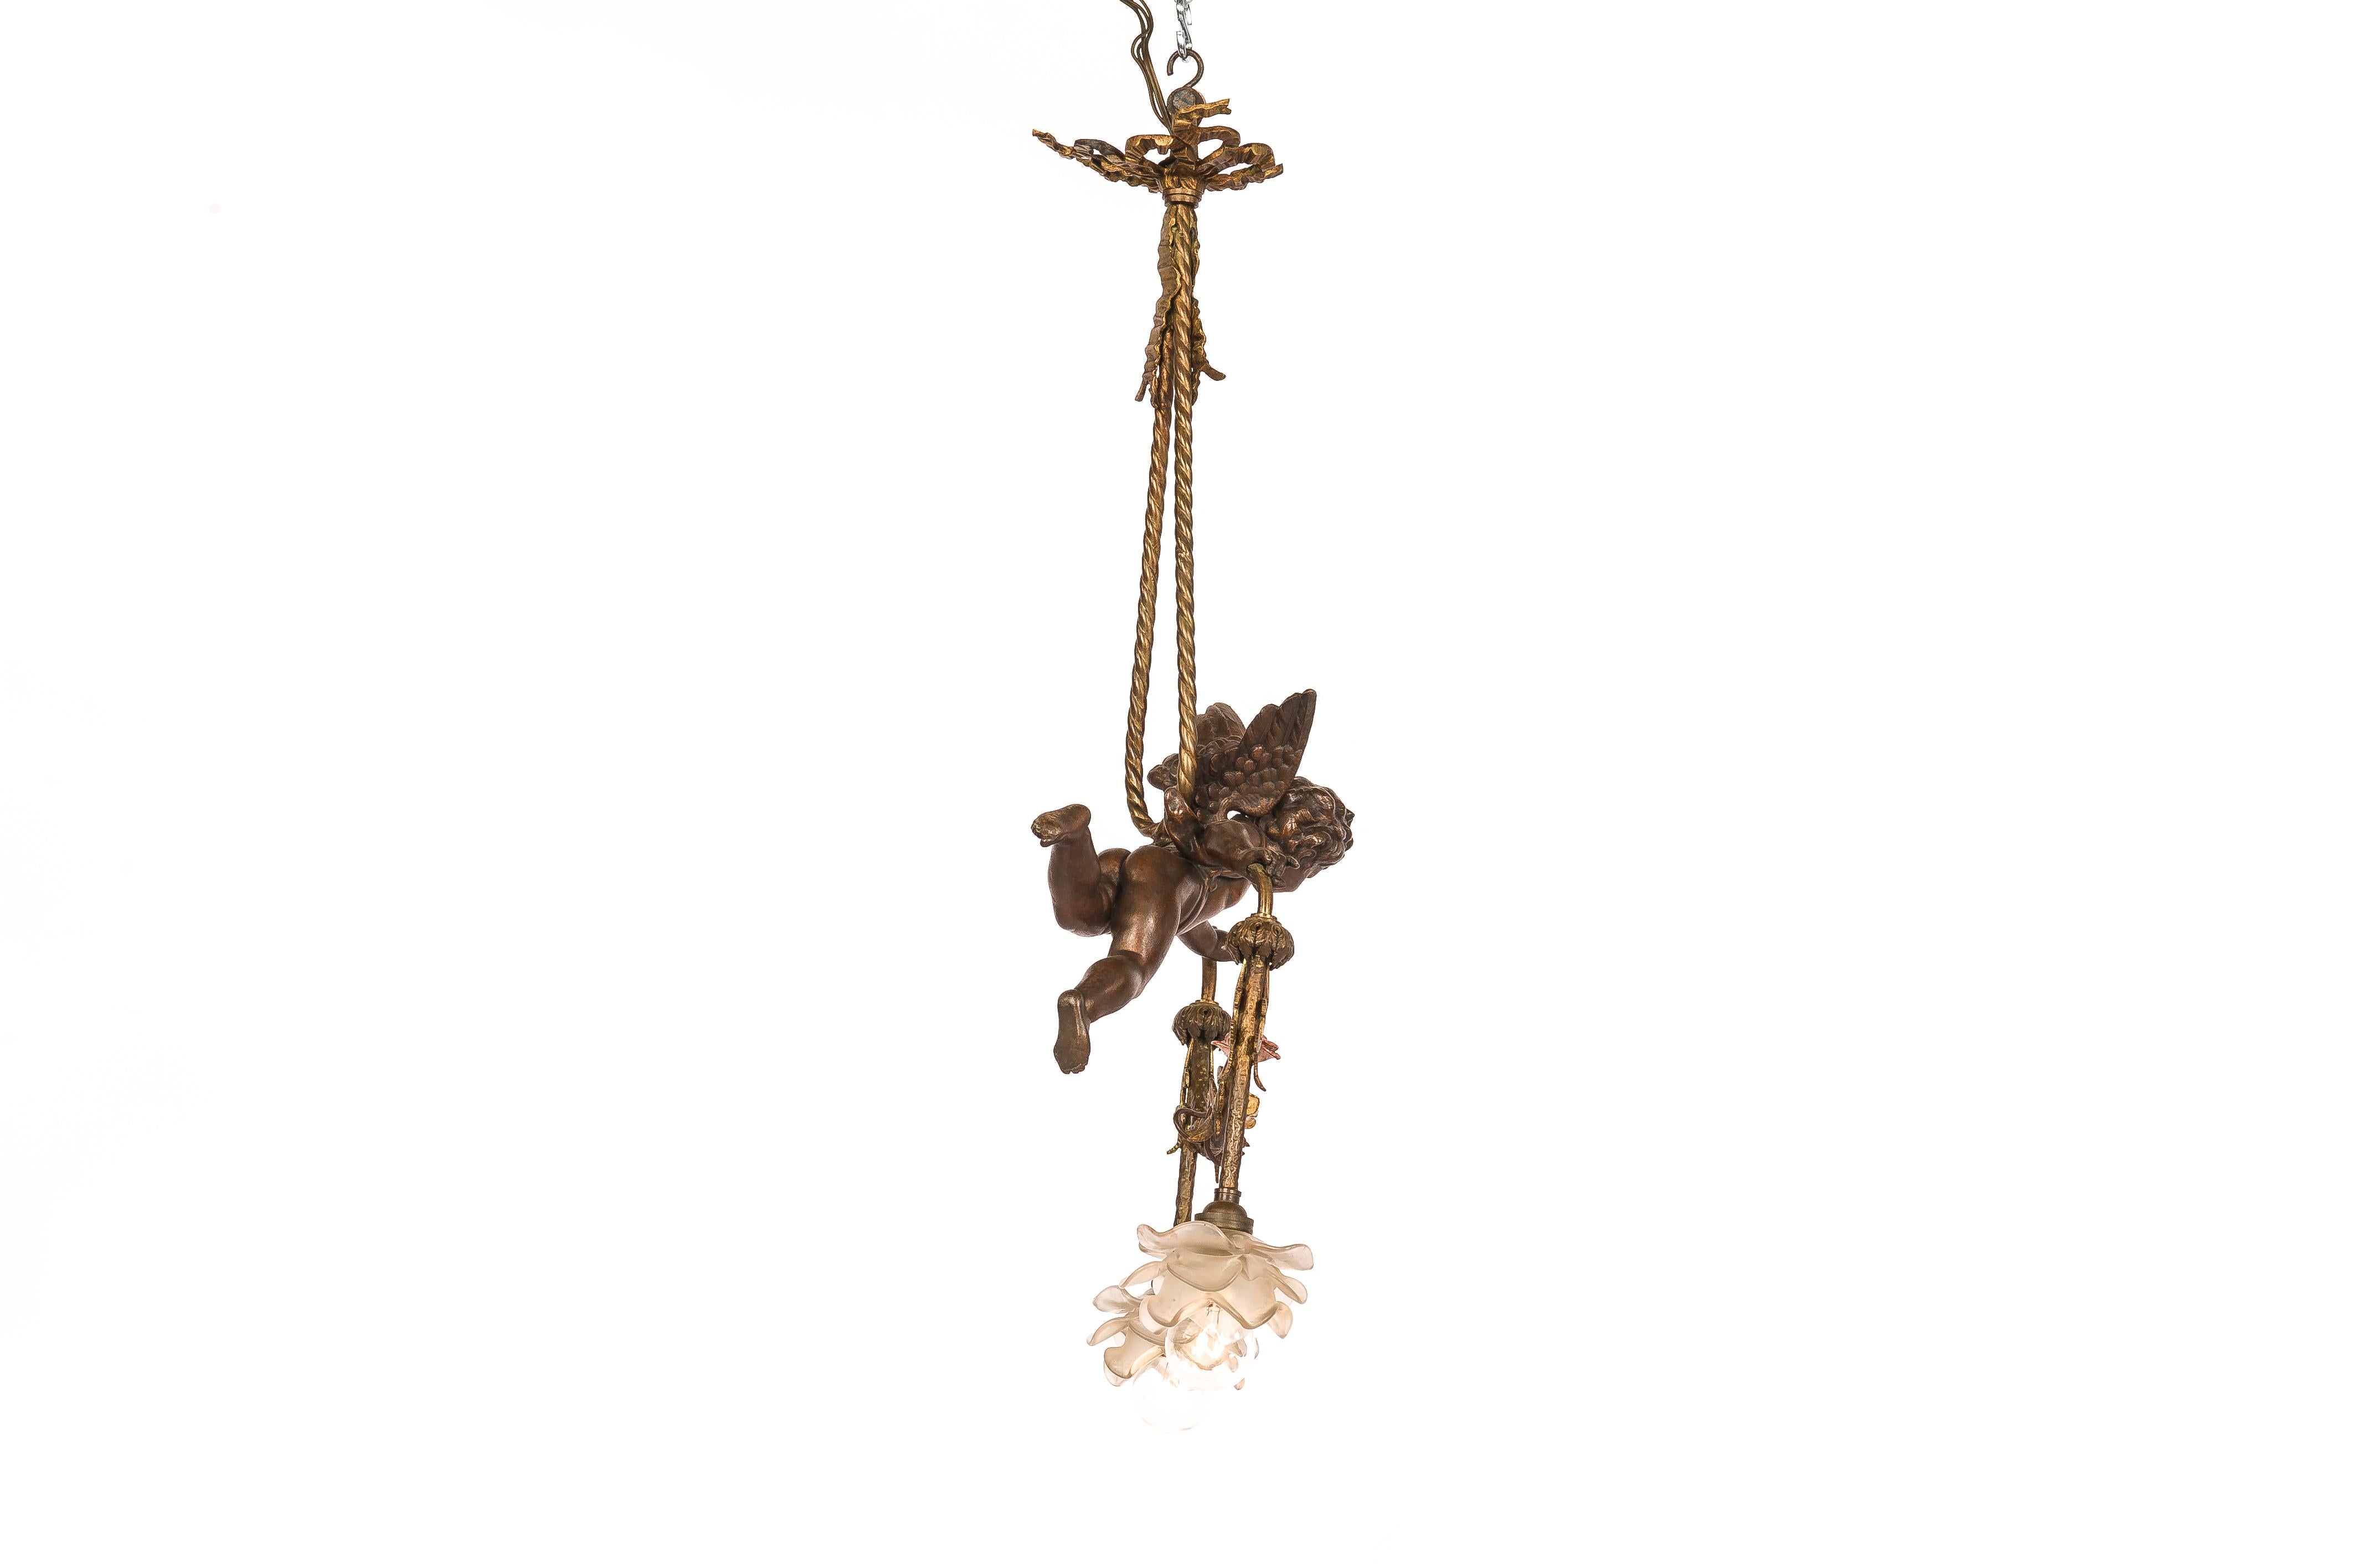 Antique 19th-Century French Brass Angel or Putti Pendant Light with Floral Garla 3